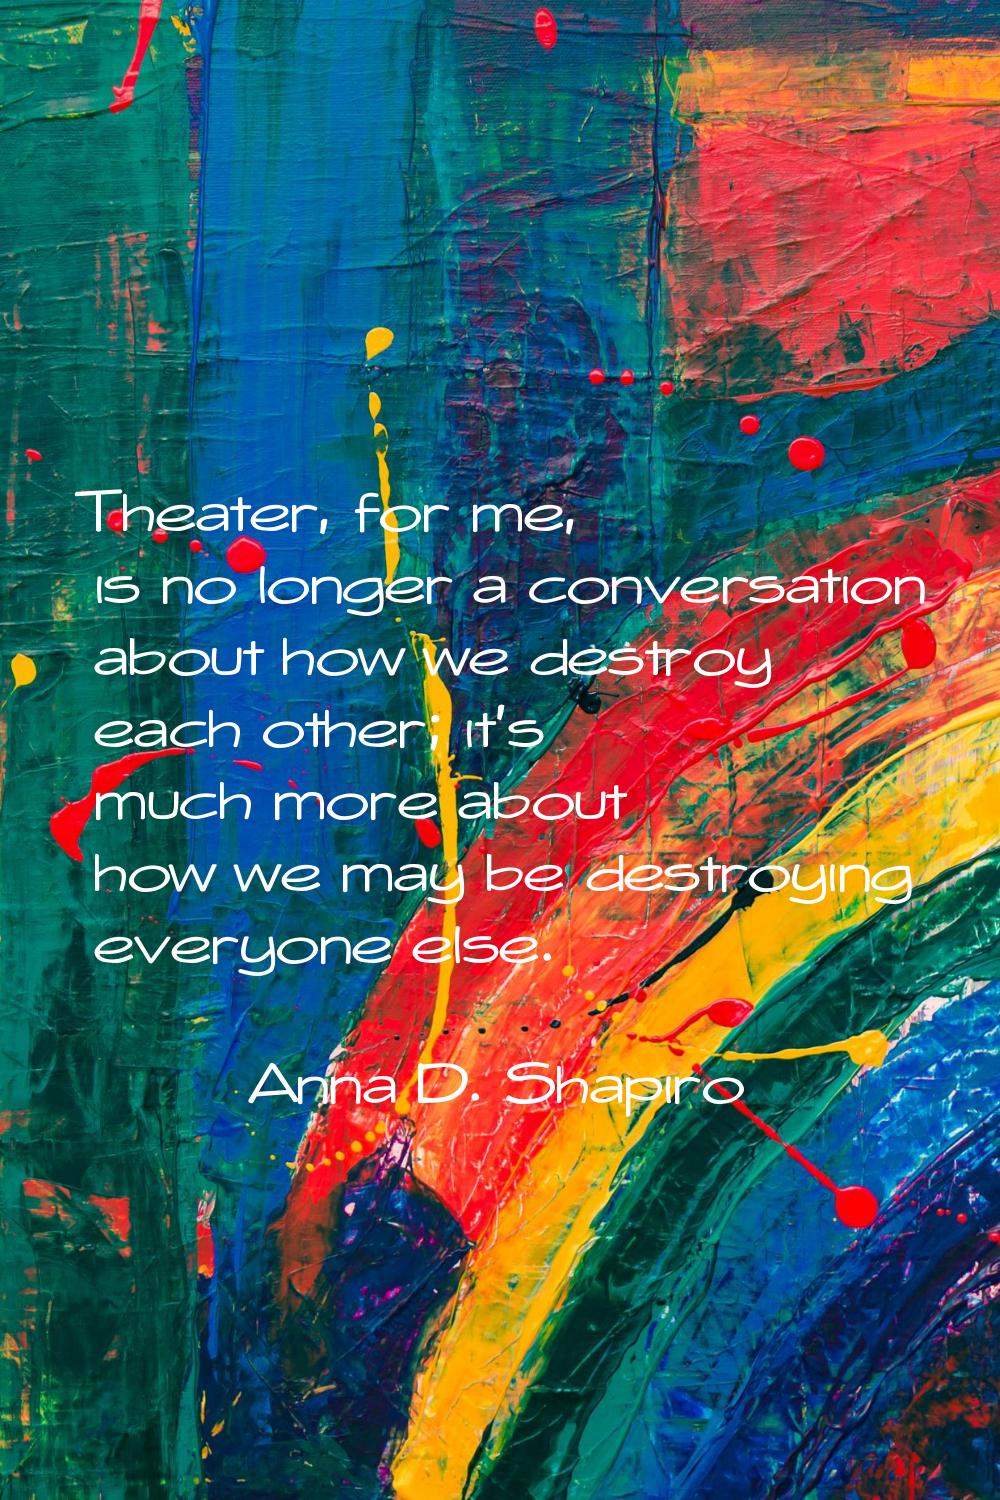 Theater, for me, is no longer a conversation about how we destroy each other; it's much more about 